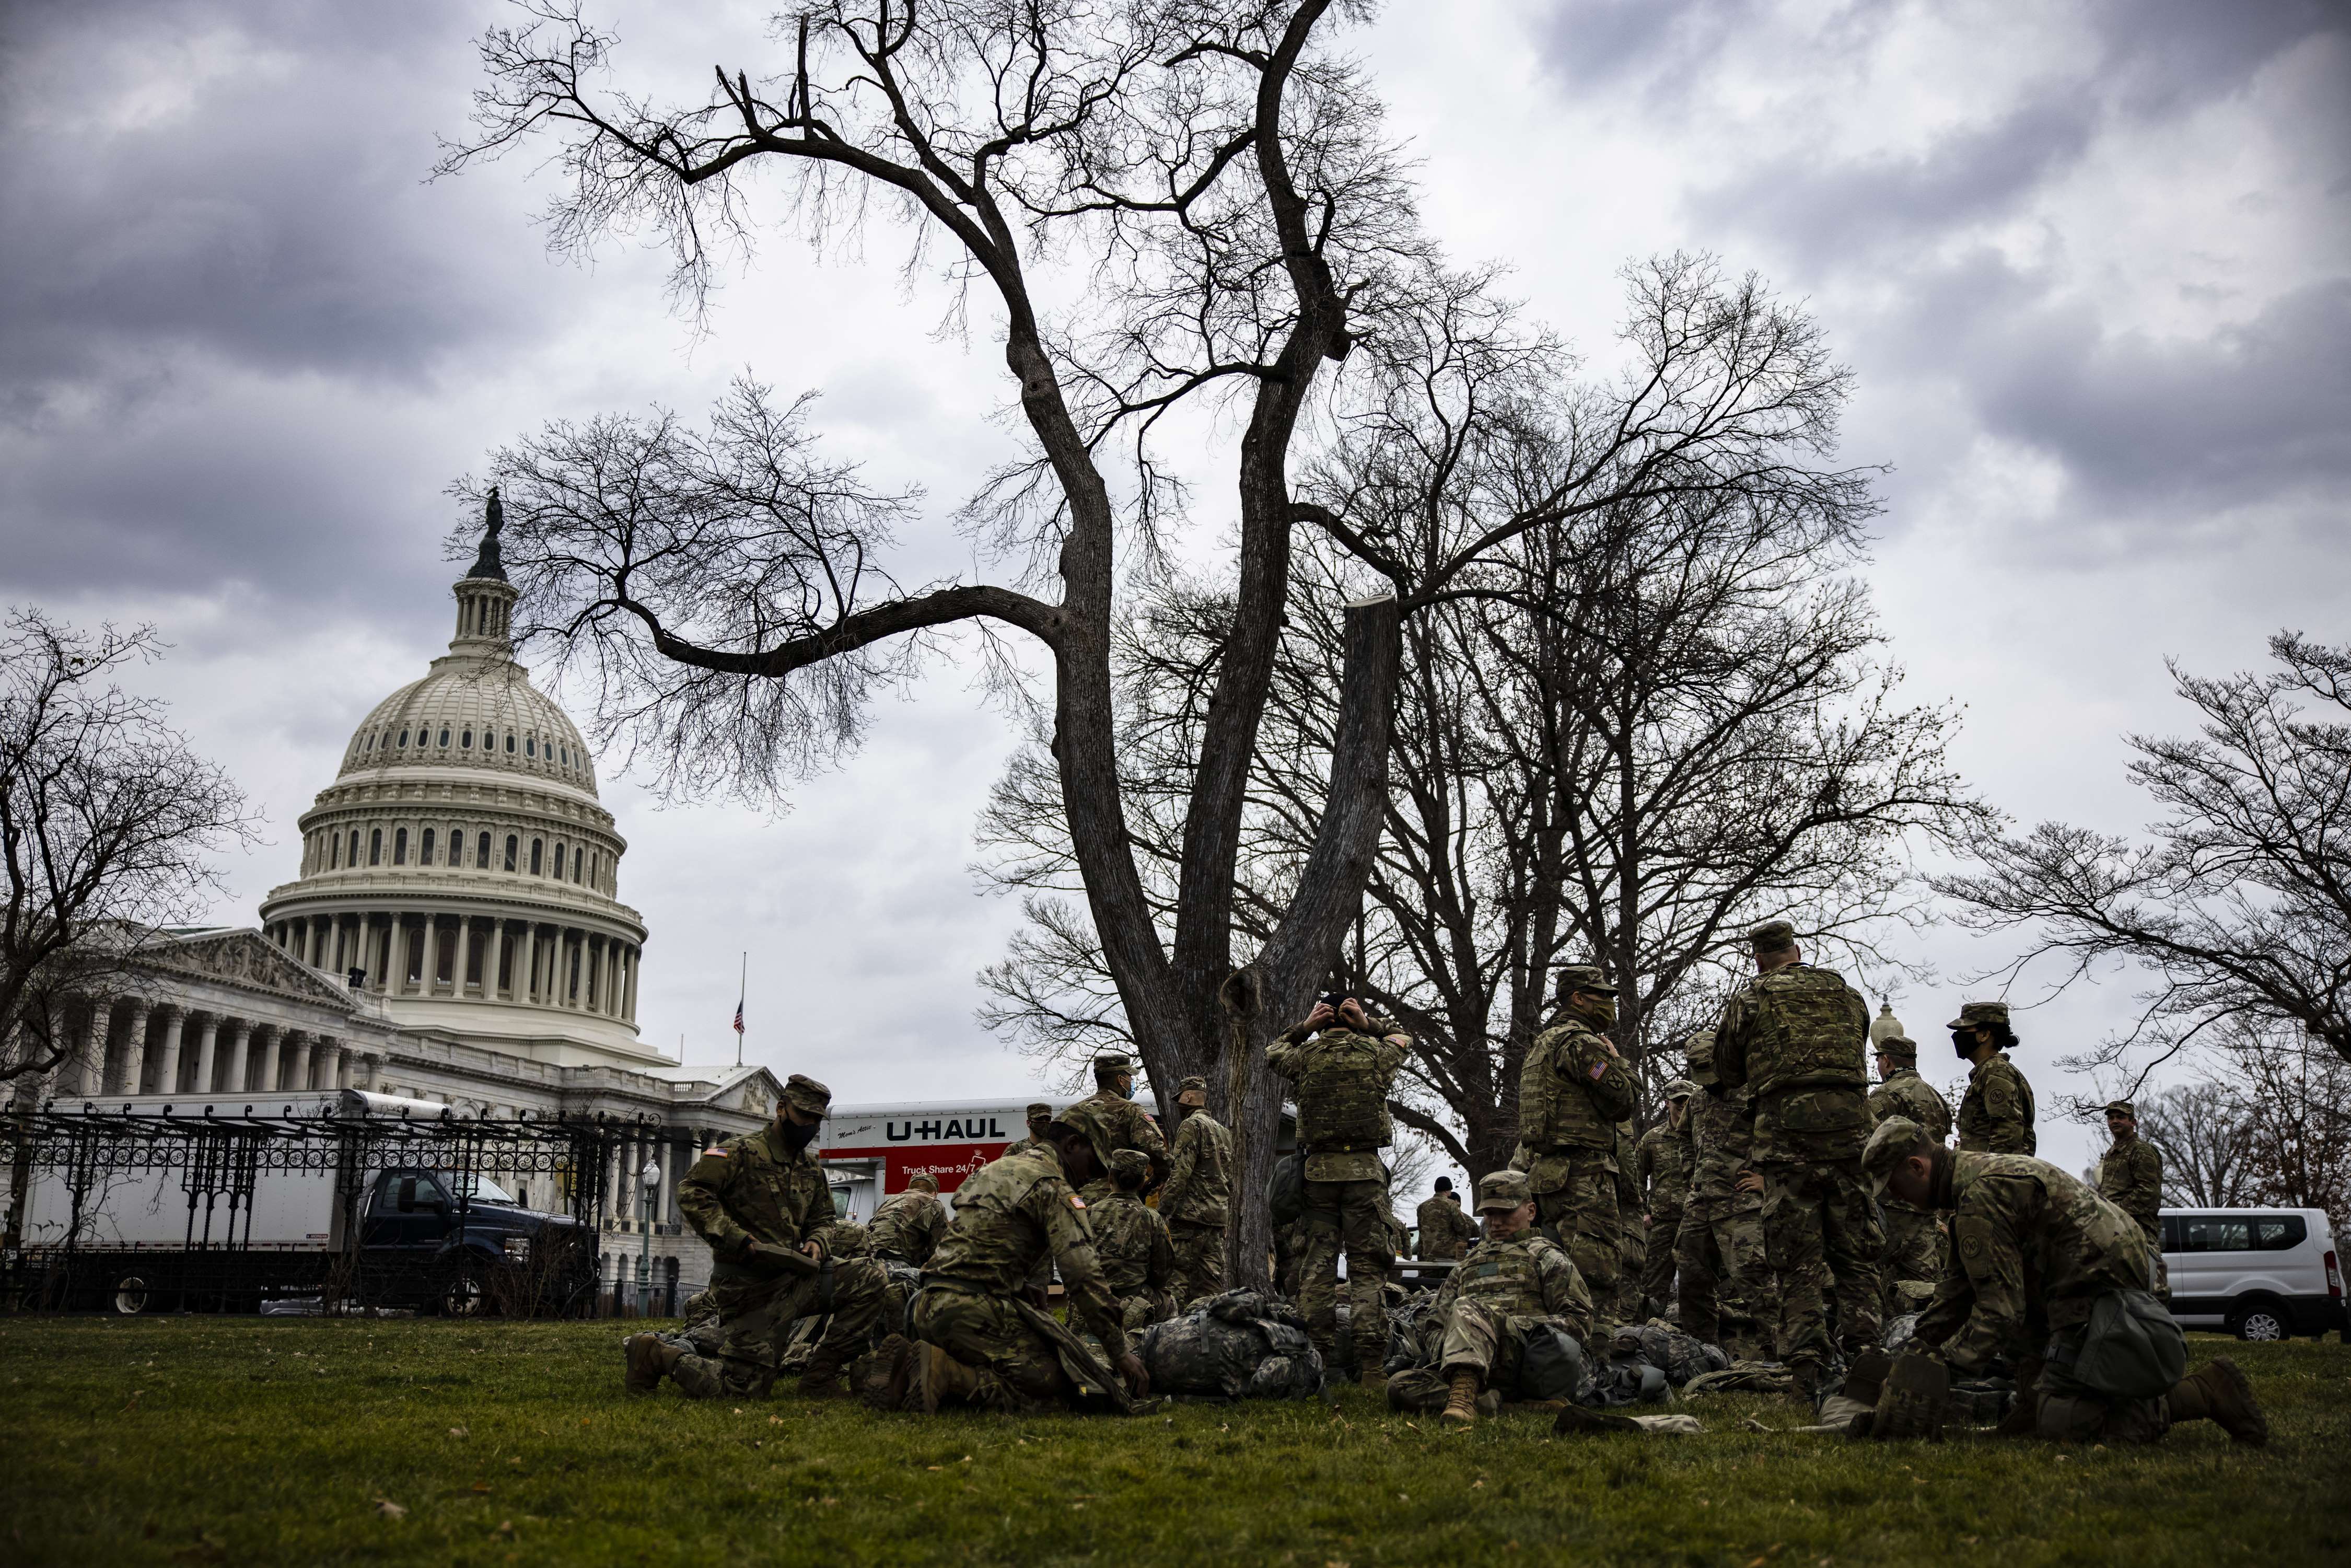 WASHINGTON: National Guard troops are seen on the lawn of the US Capitol building on Friday. - AFP n